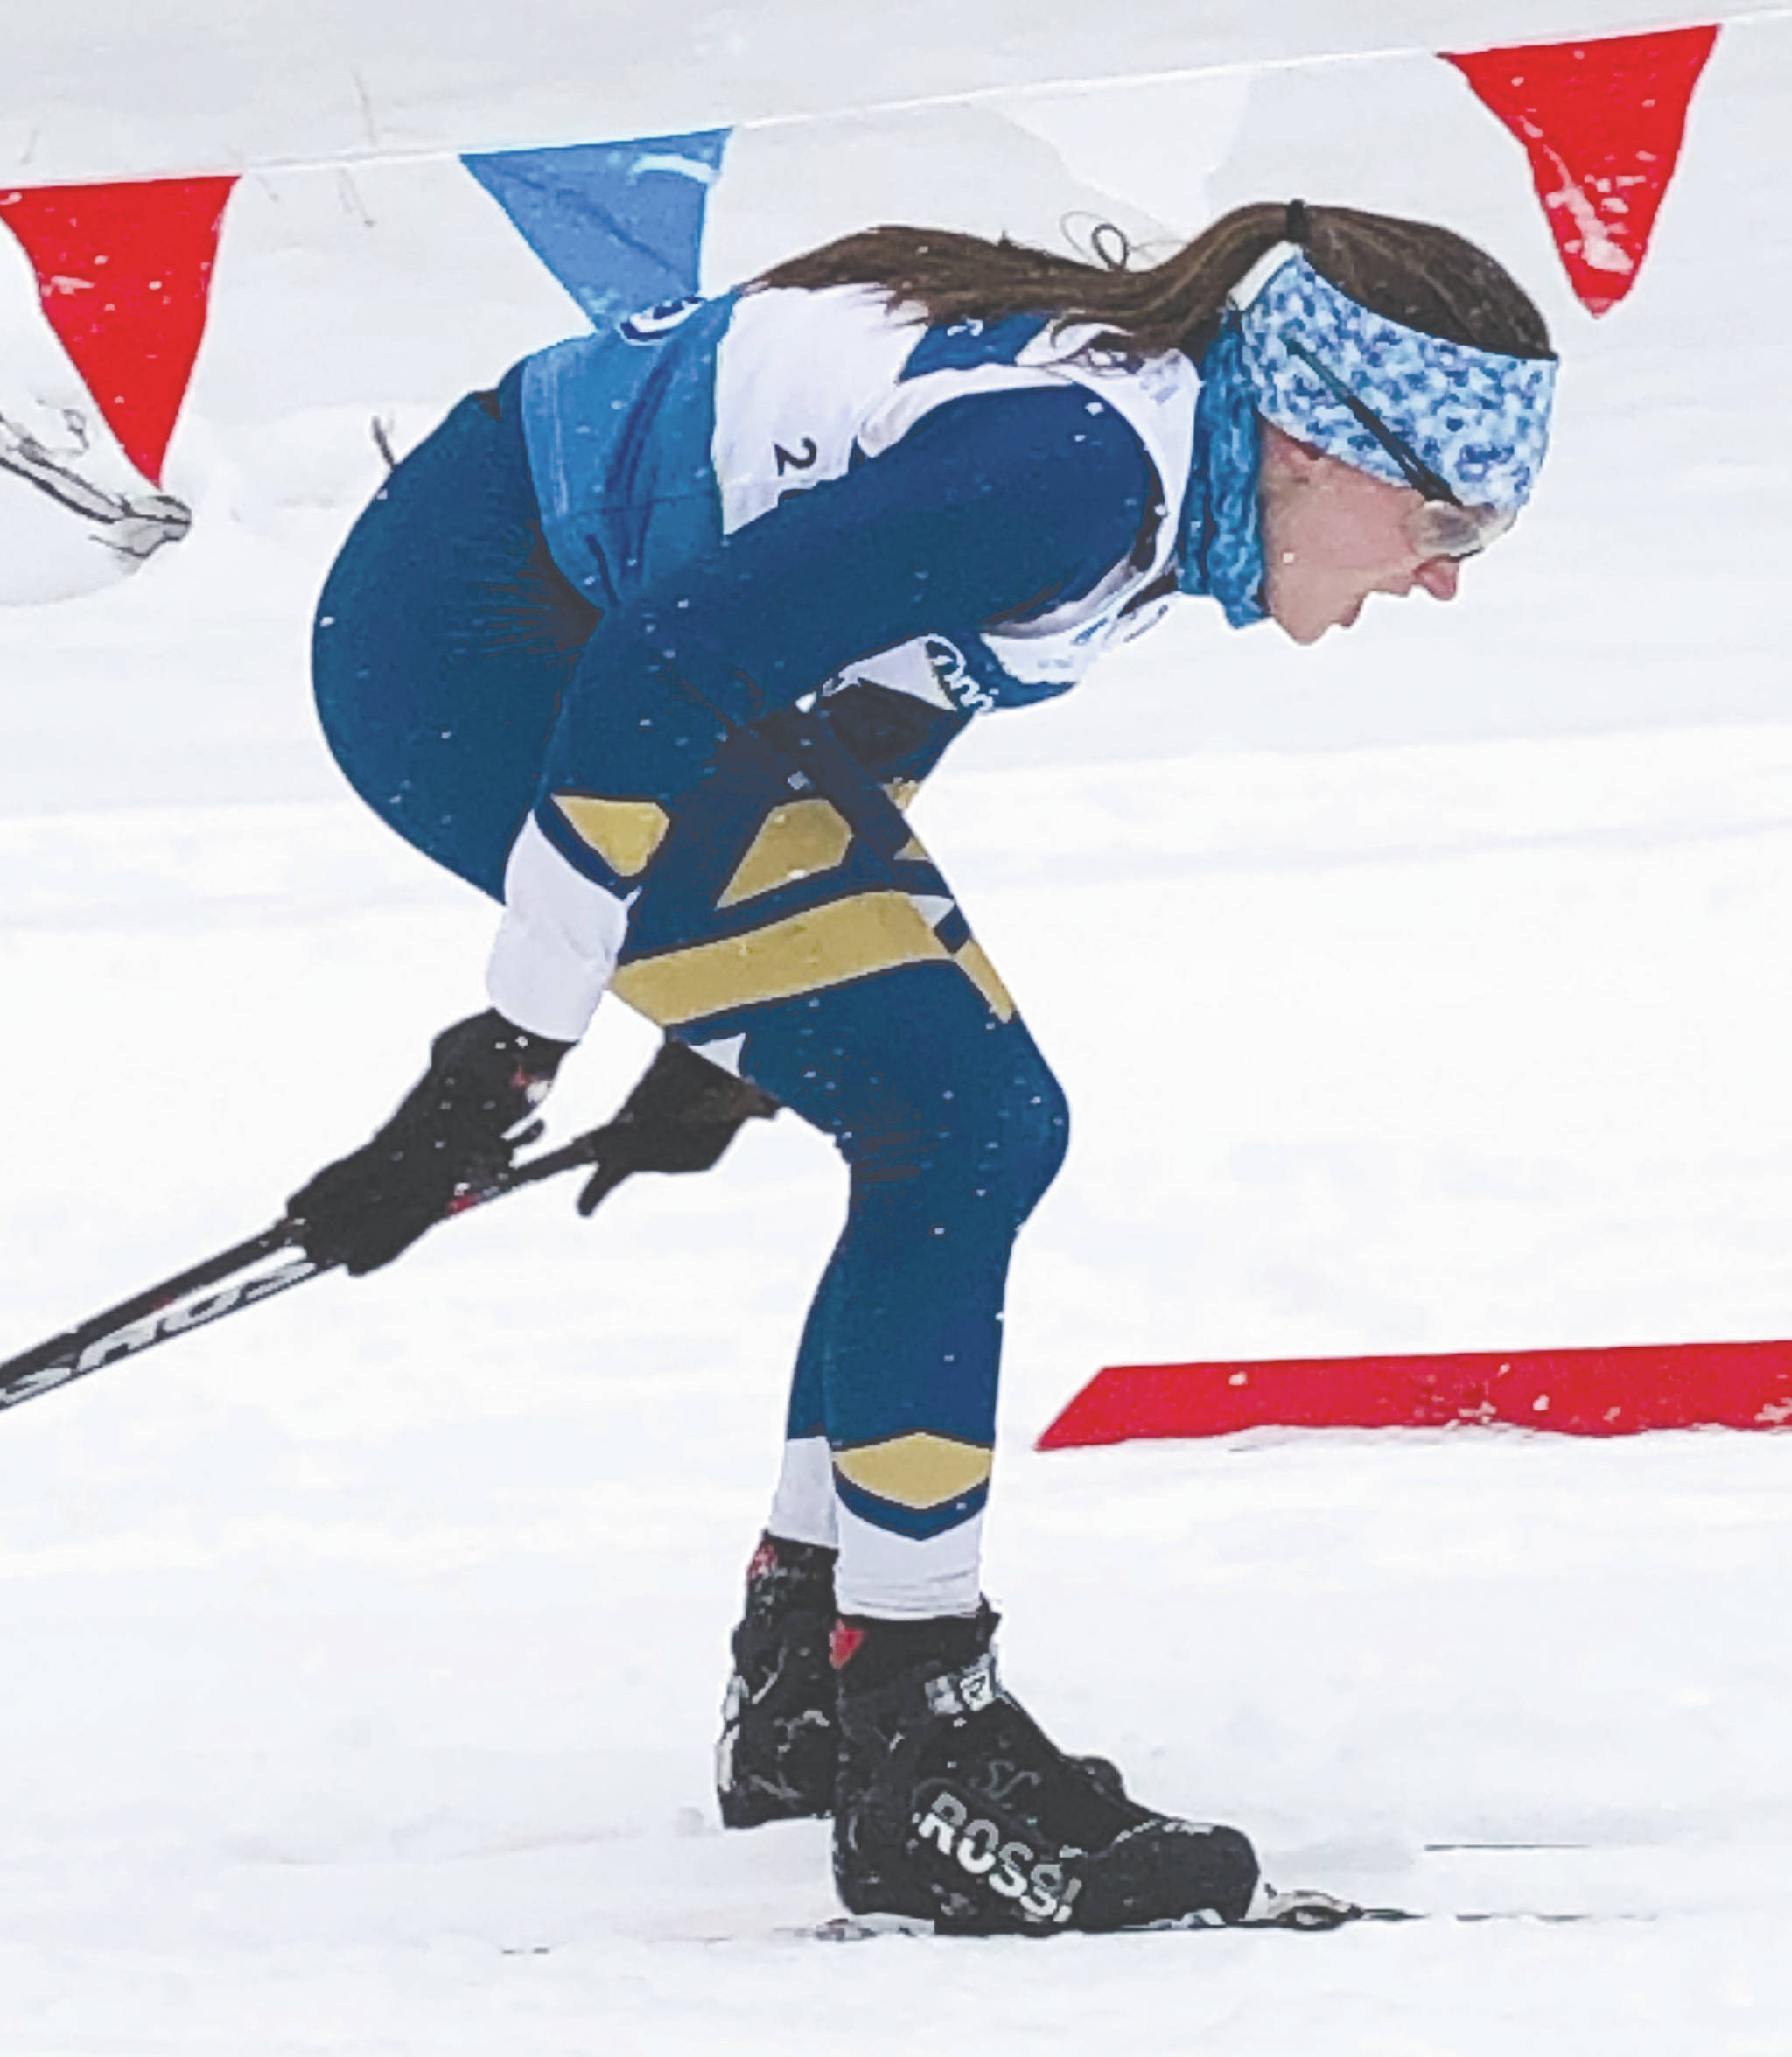 Homer’s Autumn Daigle double-poles late in the girls 7.5-kilometer classic race Friday at the Alaska state Nordic ski championships at Kincaid Park in Anchorage. (Photo by Joey Klecka/For the Clarion)